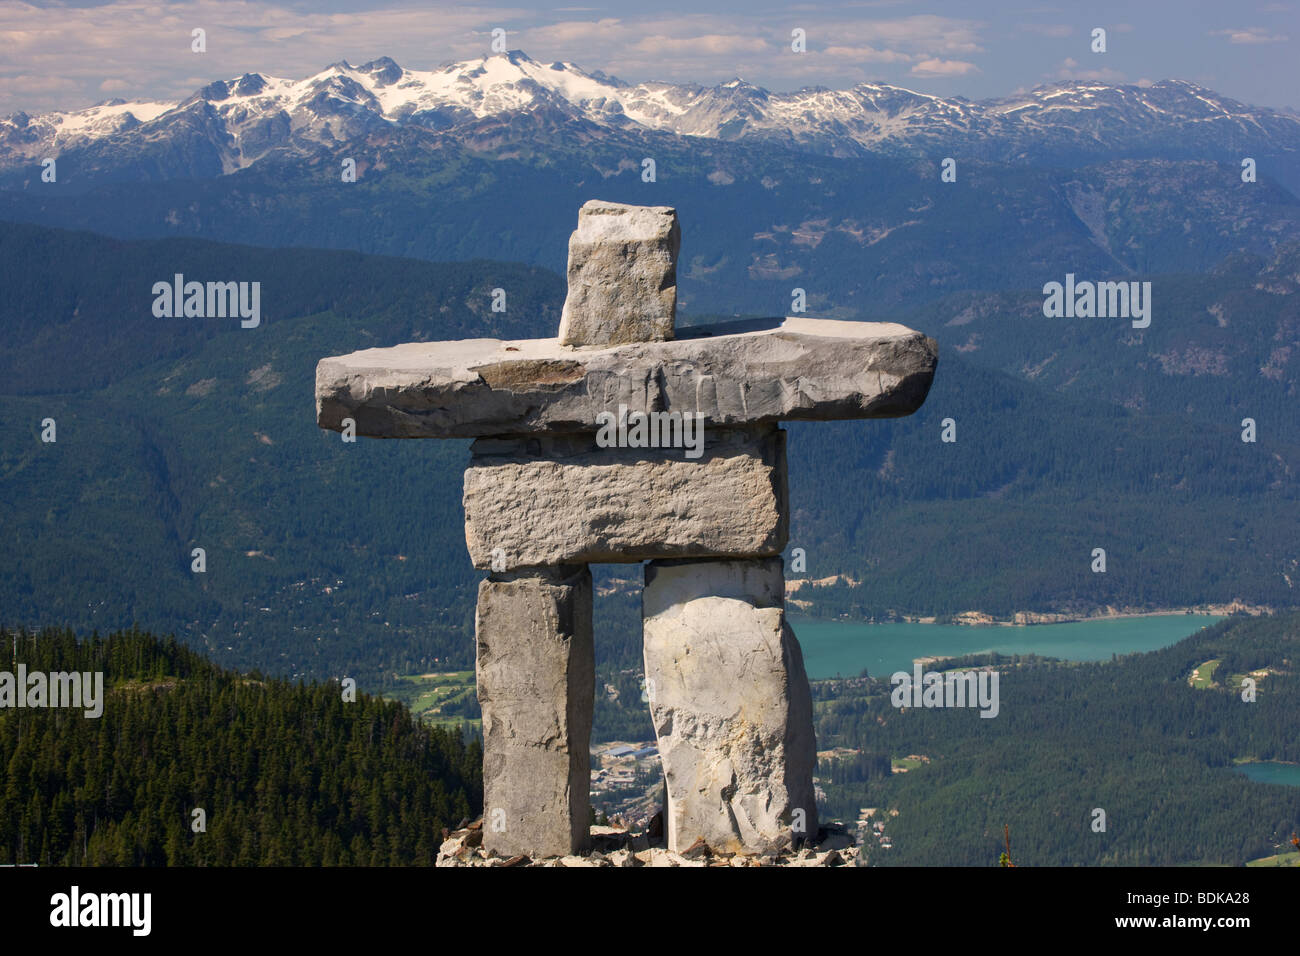 Inukshuk rock statue on Whistler Mountain is the Olympic symbol, Whistler, British Columbia, Canada. Stock Photo